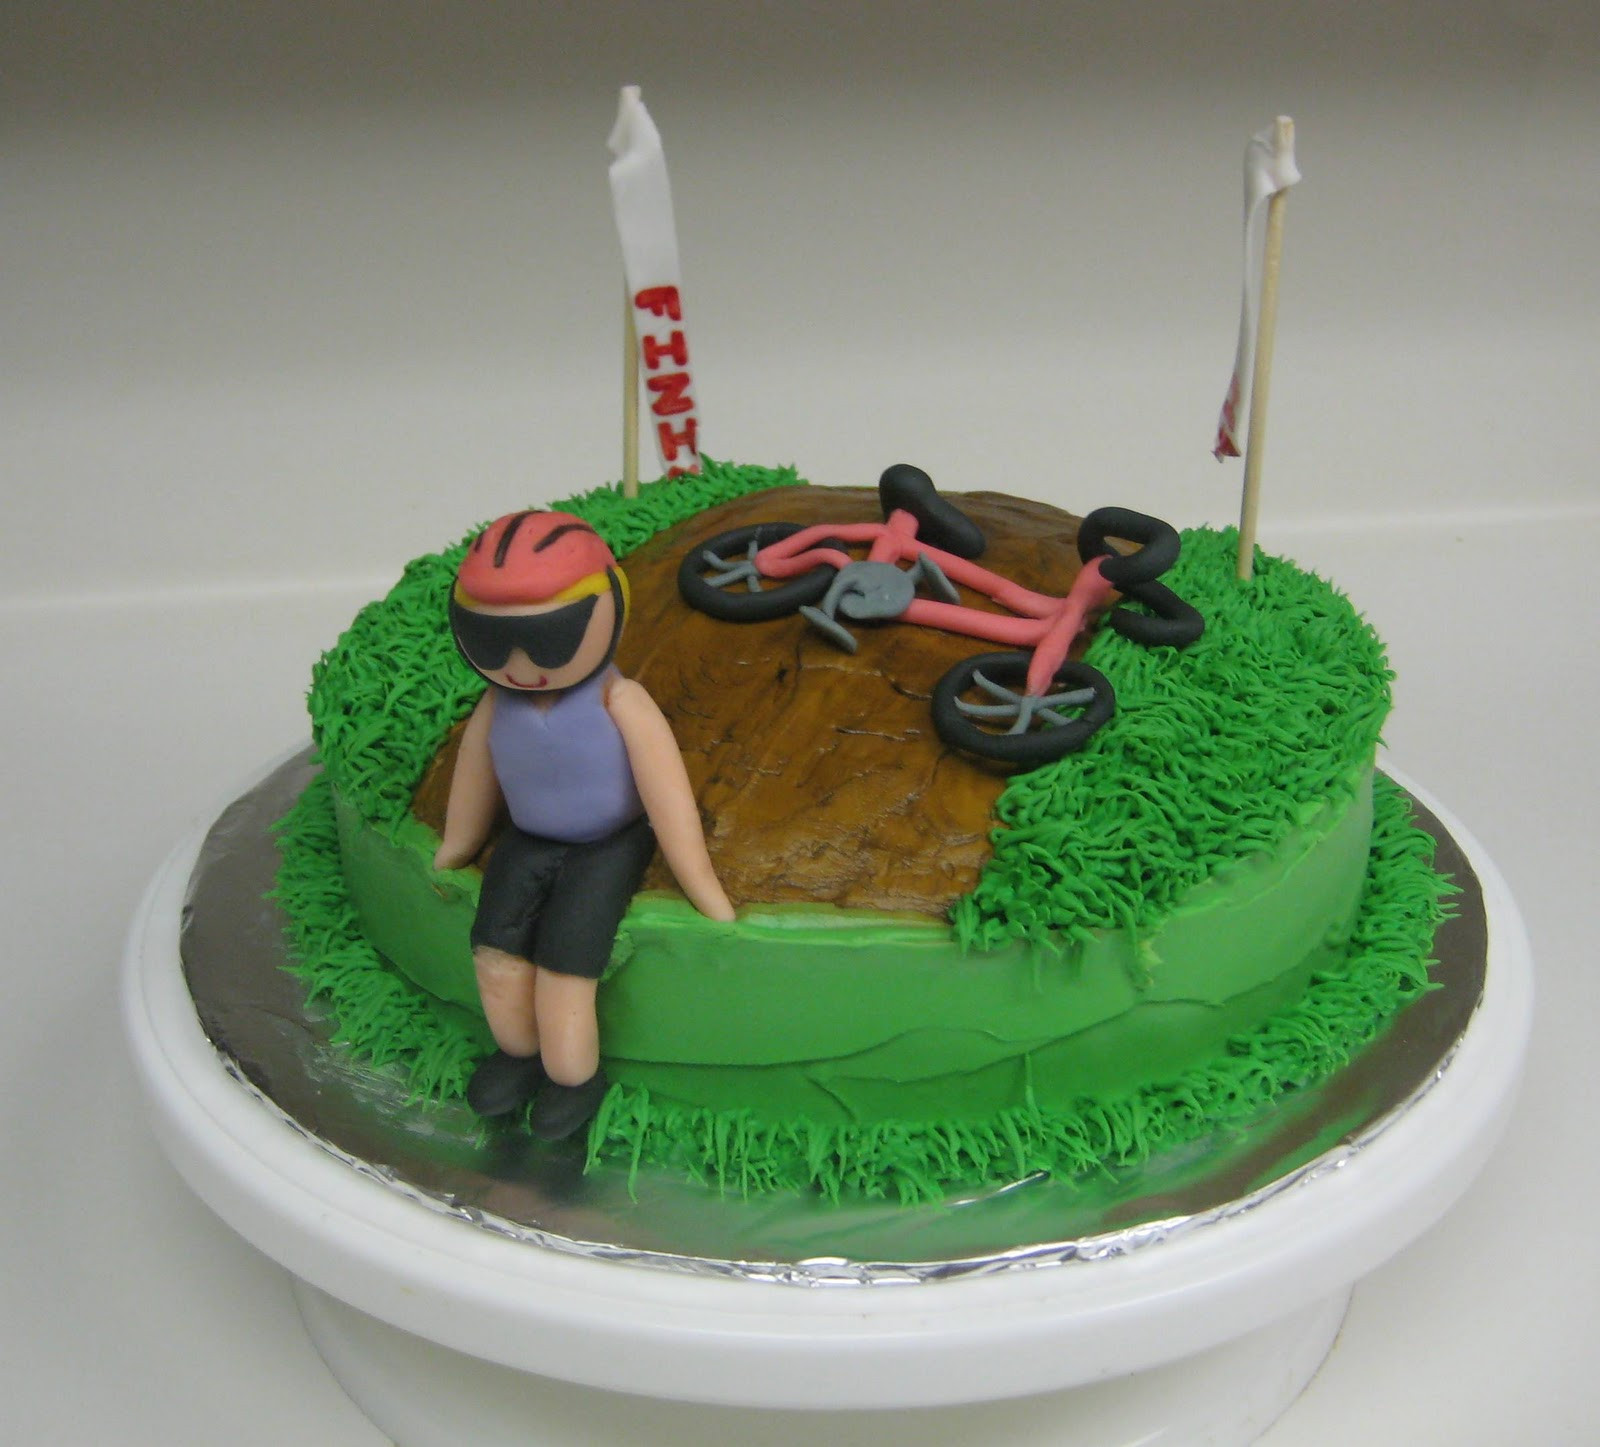 Bicycle Birthday Cake
 PHOTOGALLERY Bicycle Themed Cakes Are the Answer No